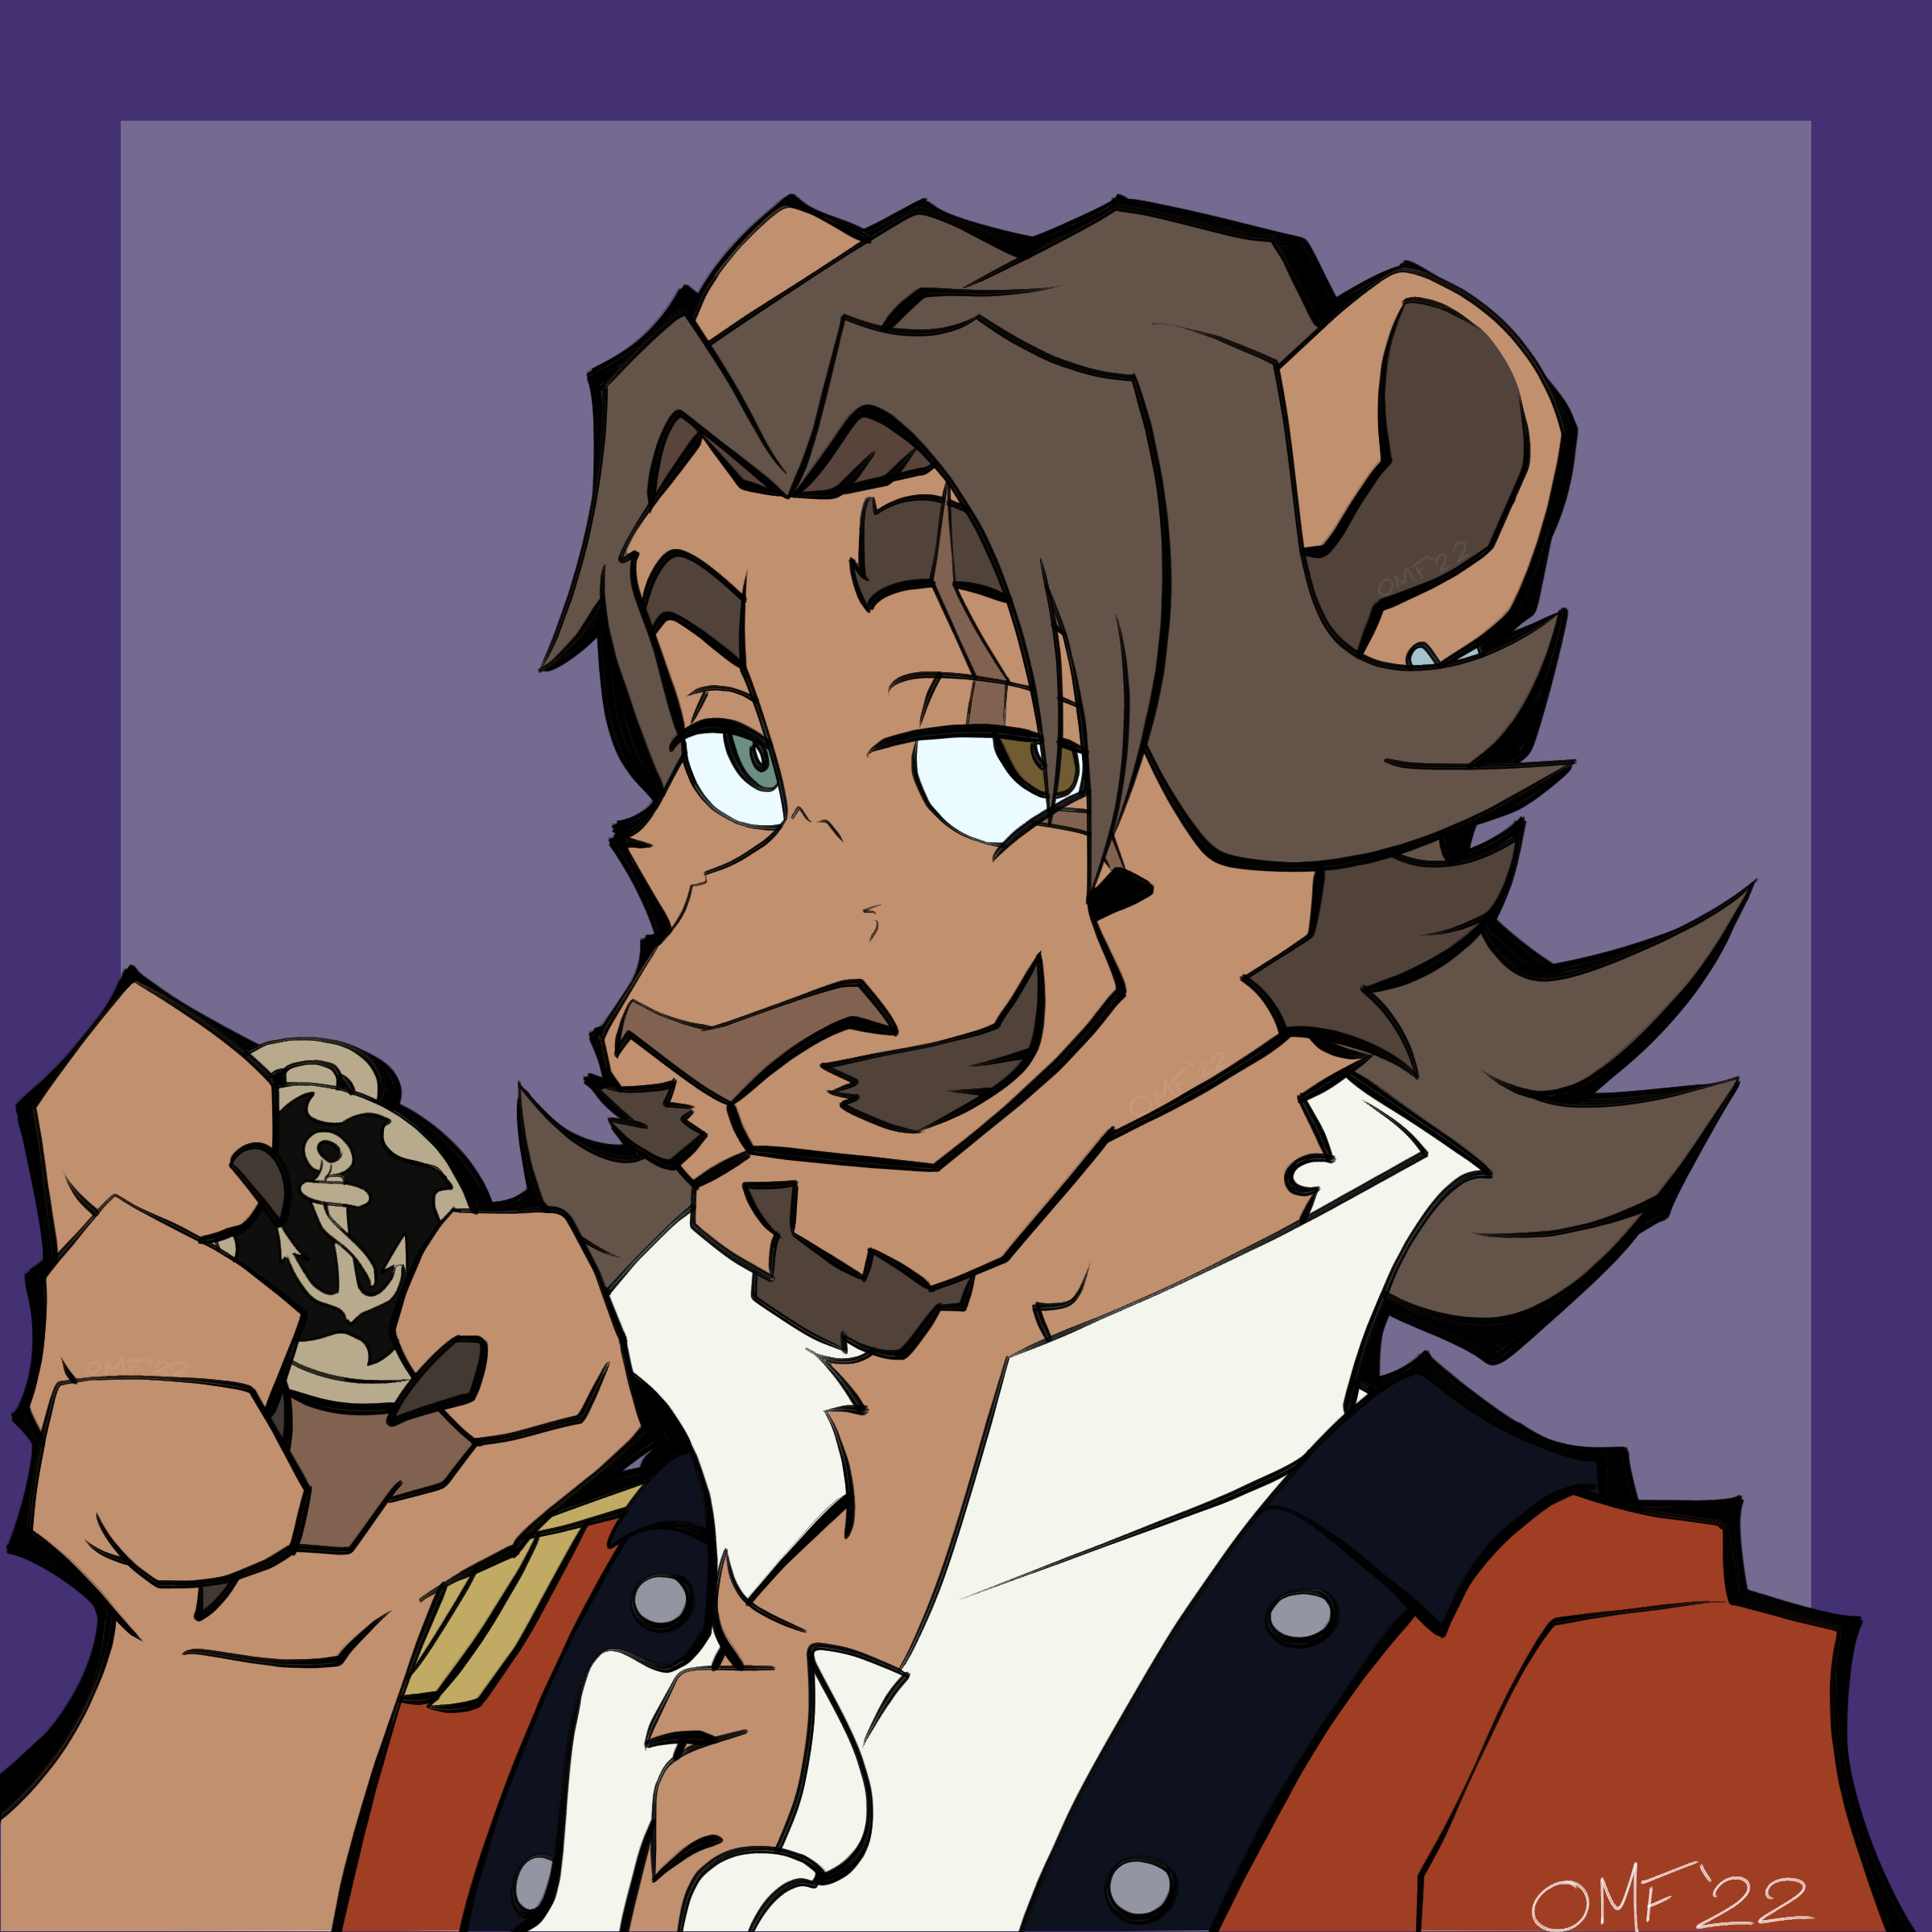 A bust drawing of an anthro lion character. They have a brown mullet, a mustache, and a goatee. They have a scar over one eye and are holding up a compass with a smug expression. They are wearing a red pirate's outfit with a popped collar.